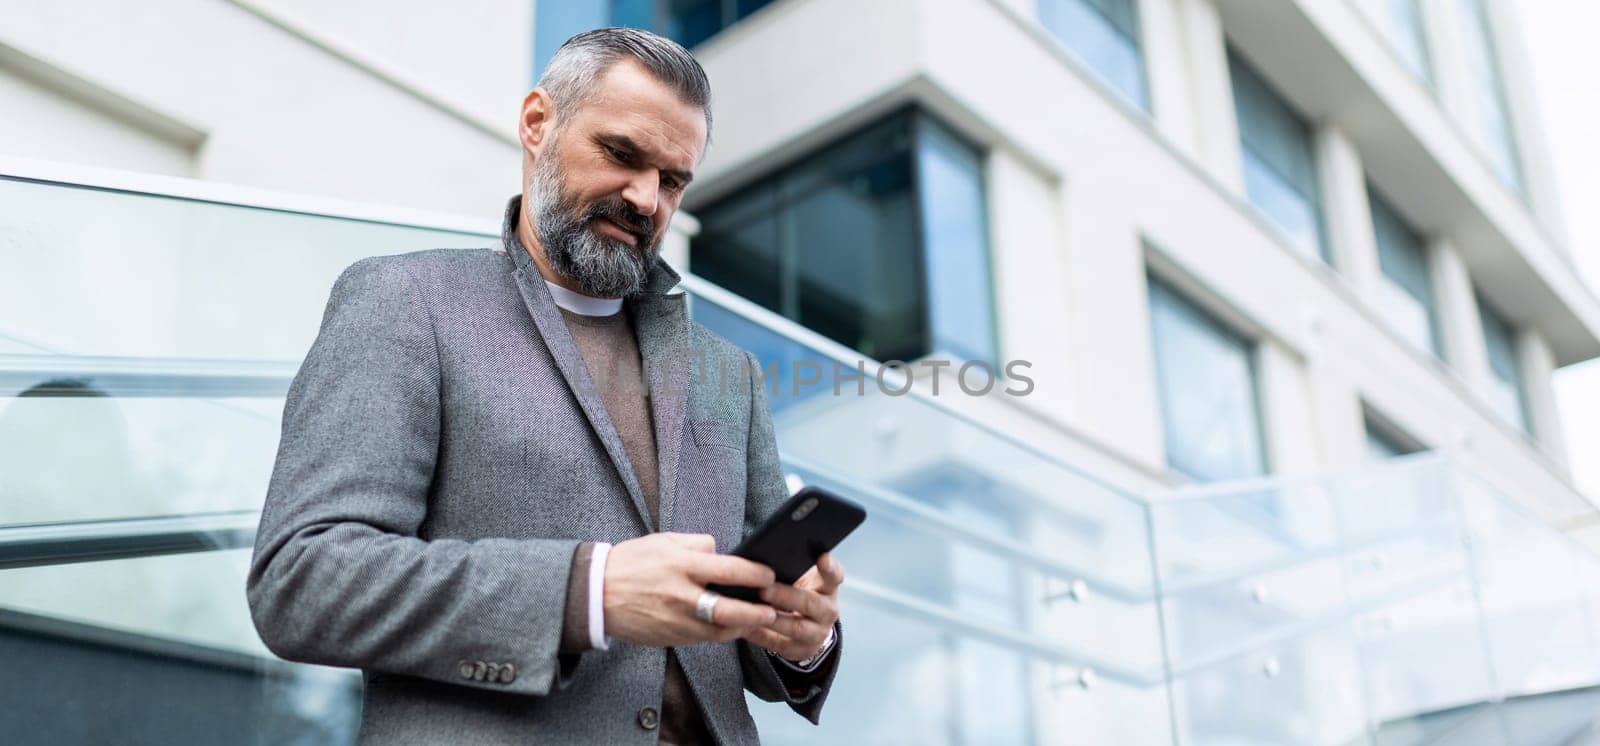 mature adult male financier with gray hair and a beard with a phone in his hands on the background of the building by TRMK